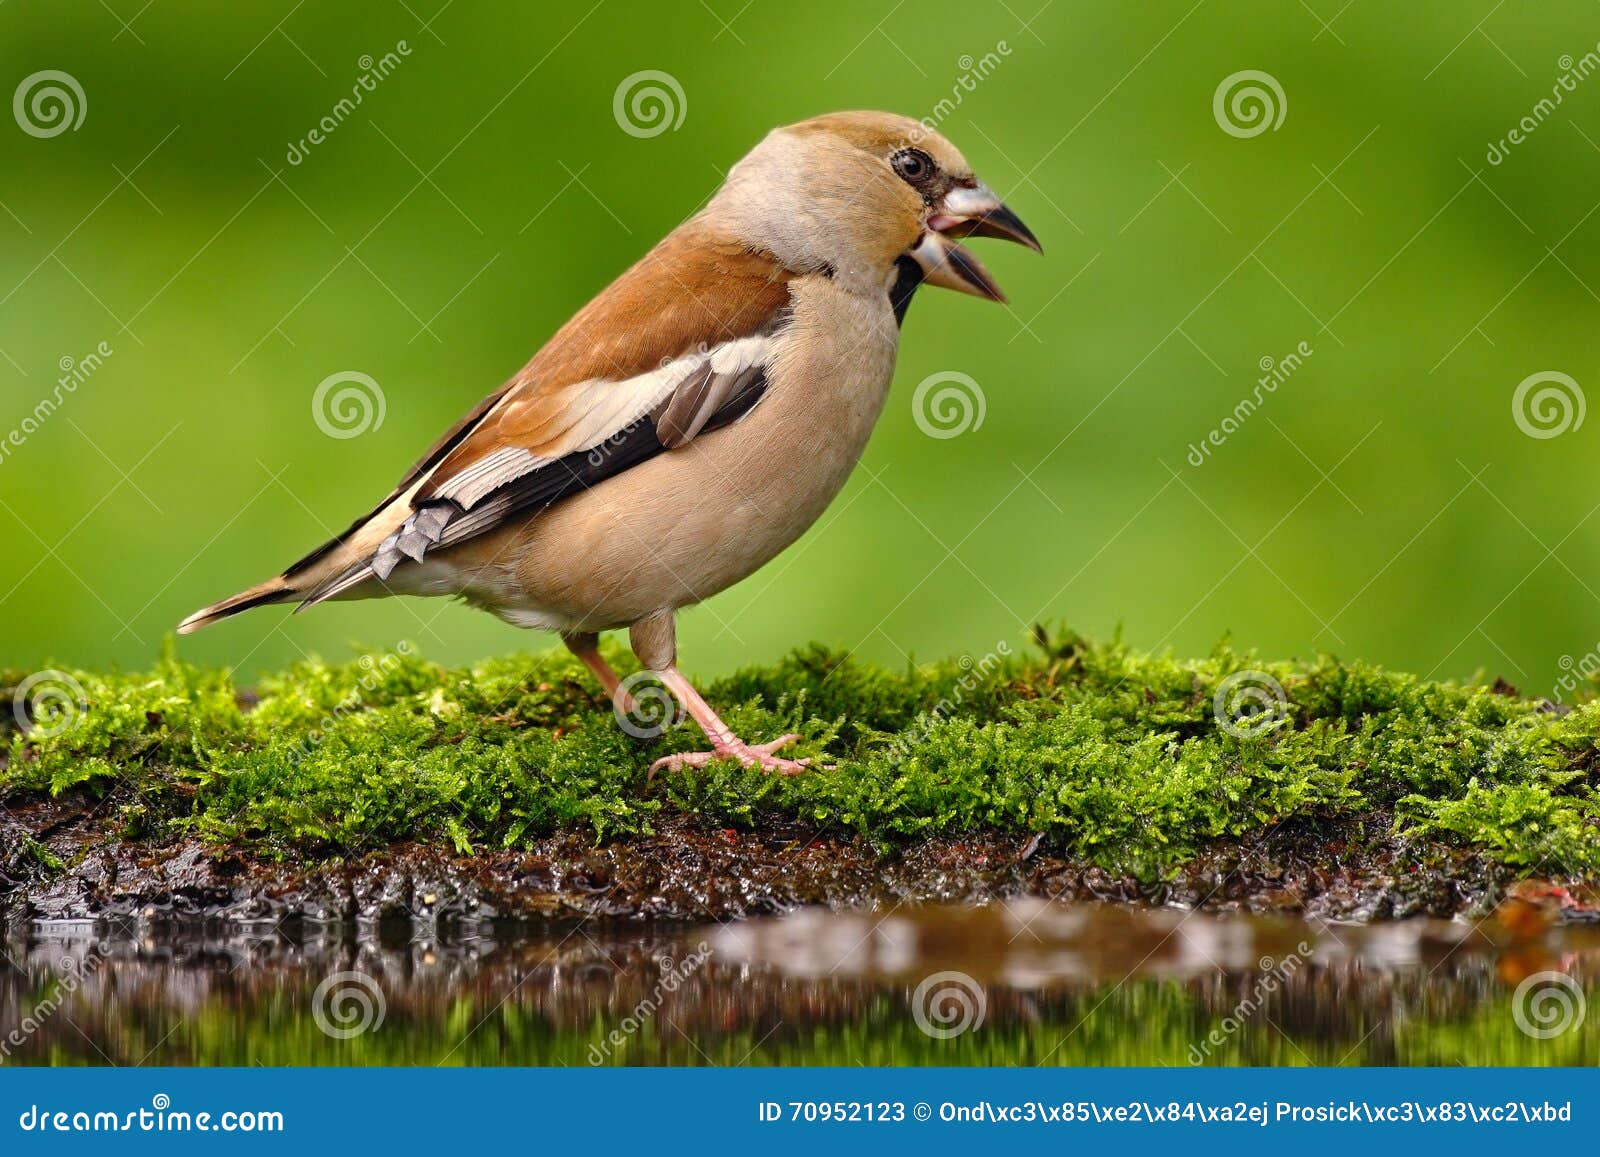 songbird, hawfinch, coccothraustes coccothraustes, brown songbird sitting in the water, nice lichen tree branch, bird in the